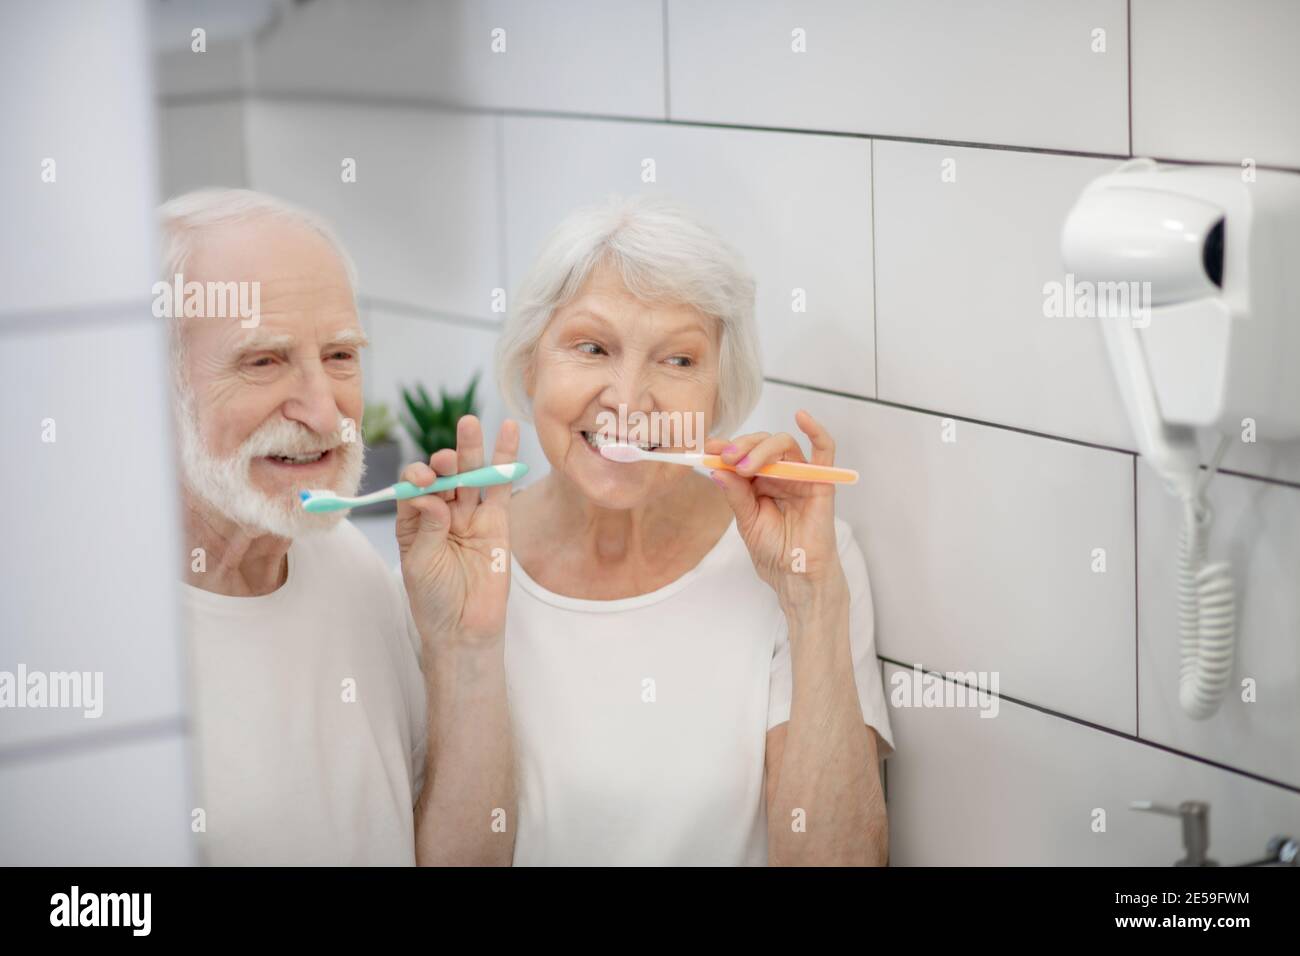 Elderly couple brushing their teeth together and feeling good Stock Photo